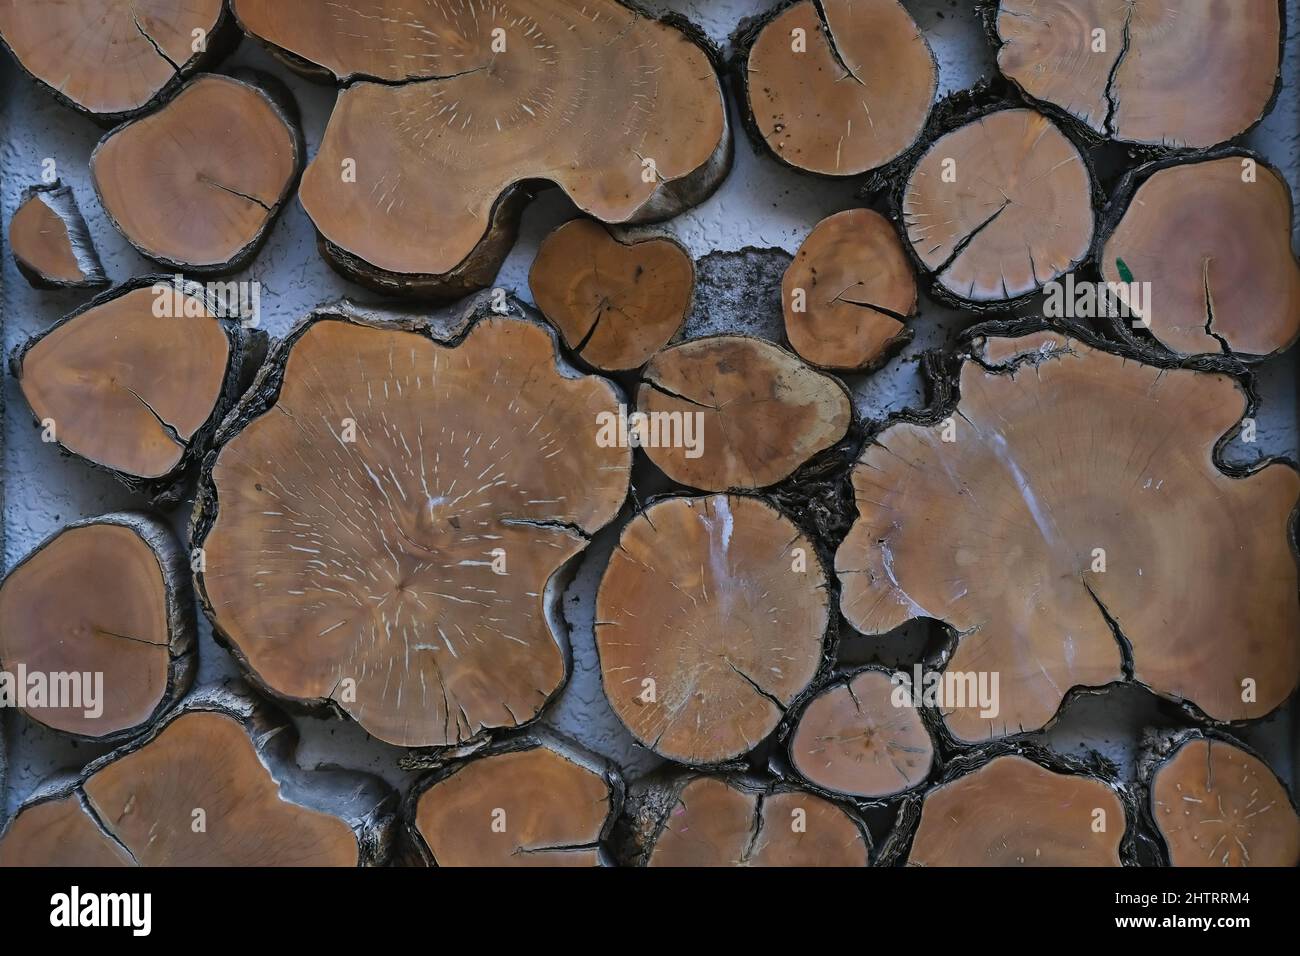 Fragment of street wall decoration of slices cross sections tree trunks as background.Recycling and reuse concept  Stock Photo